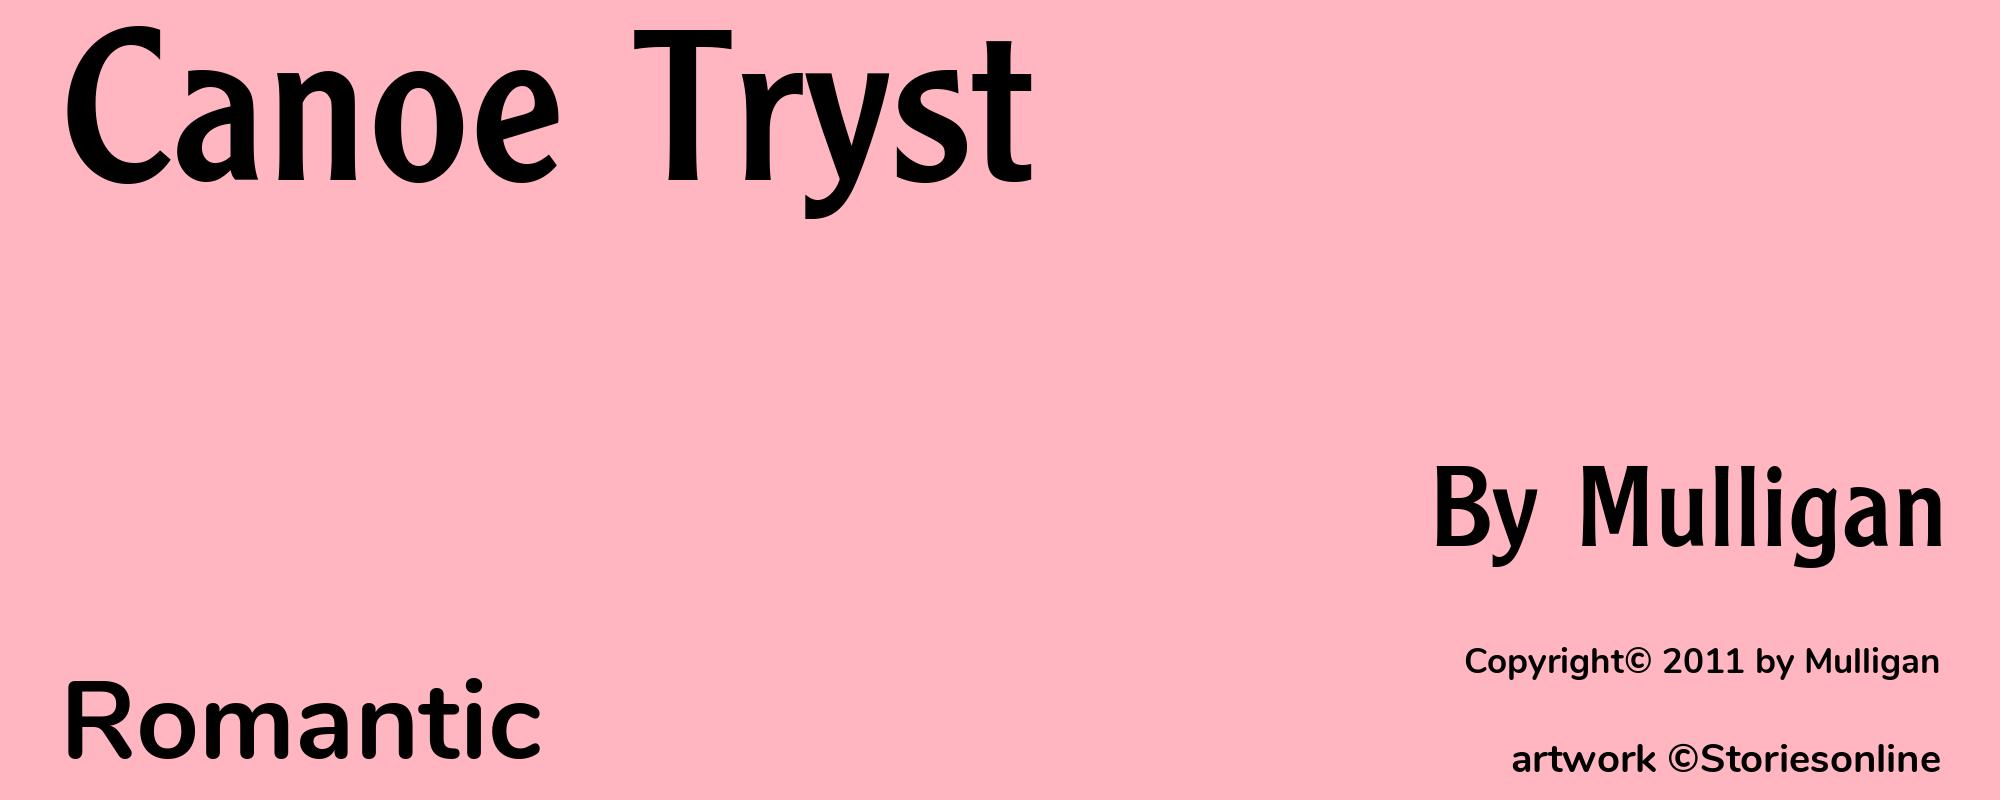 Canoe Tryst - Cover